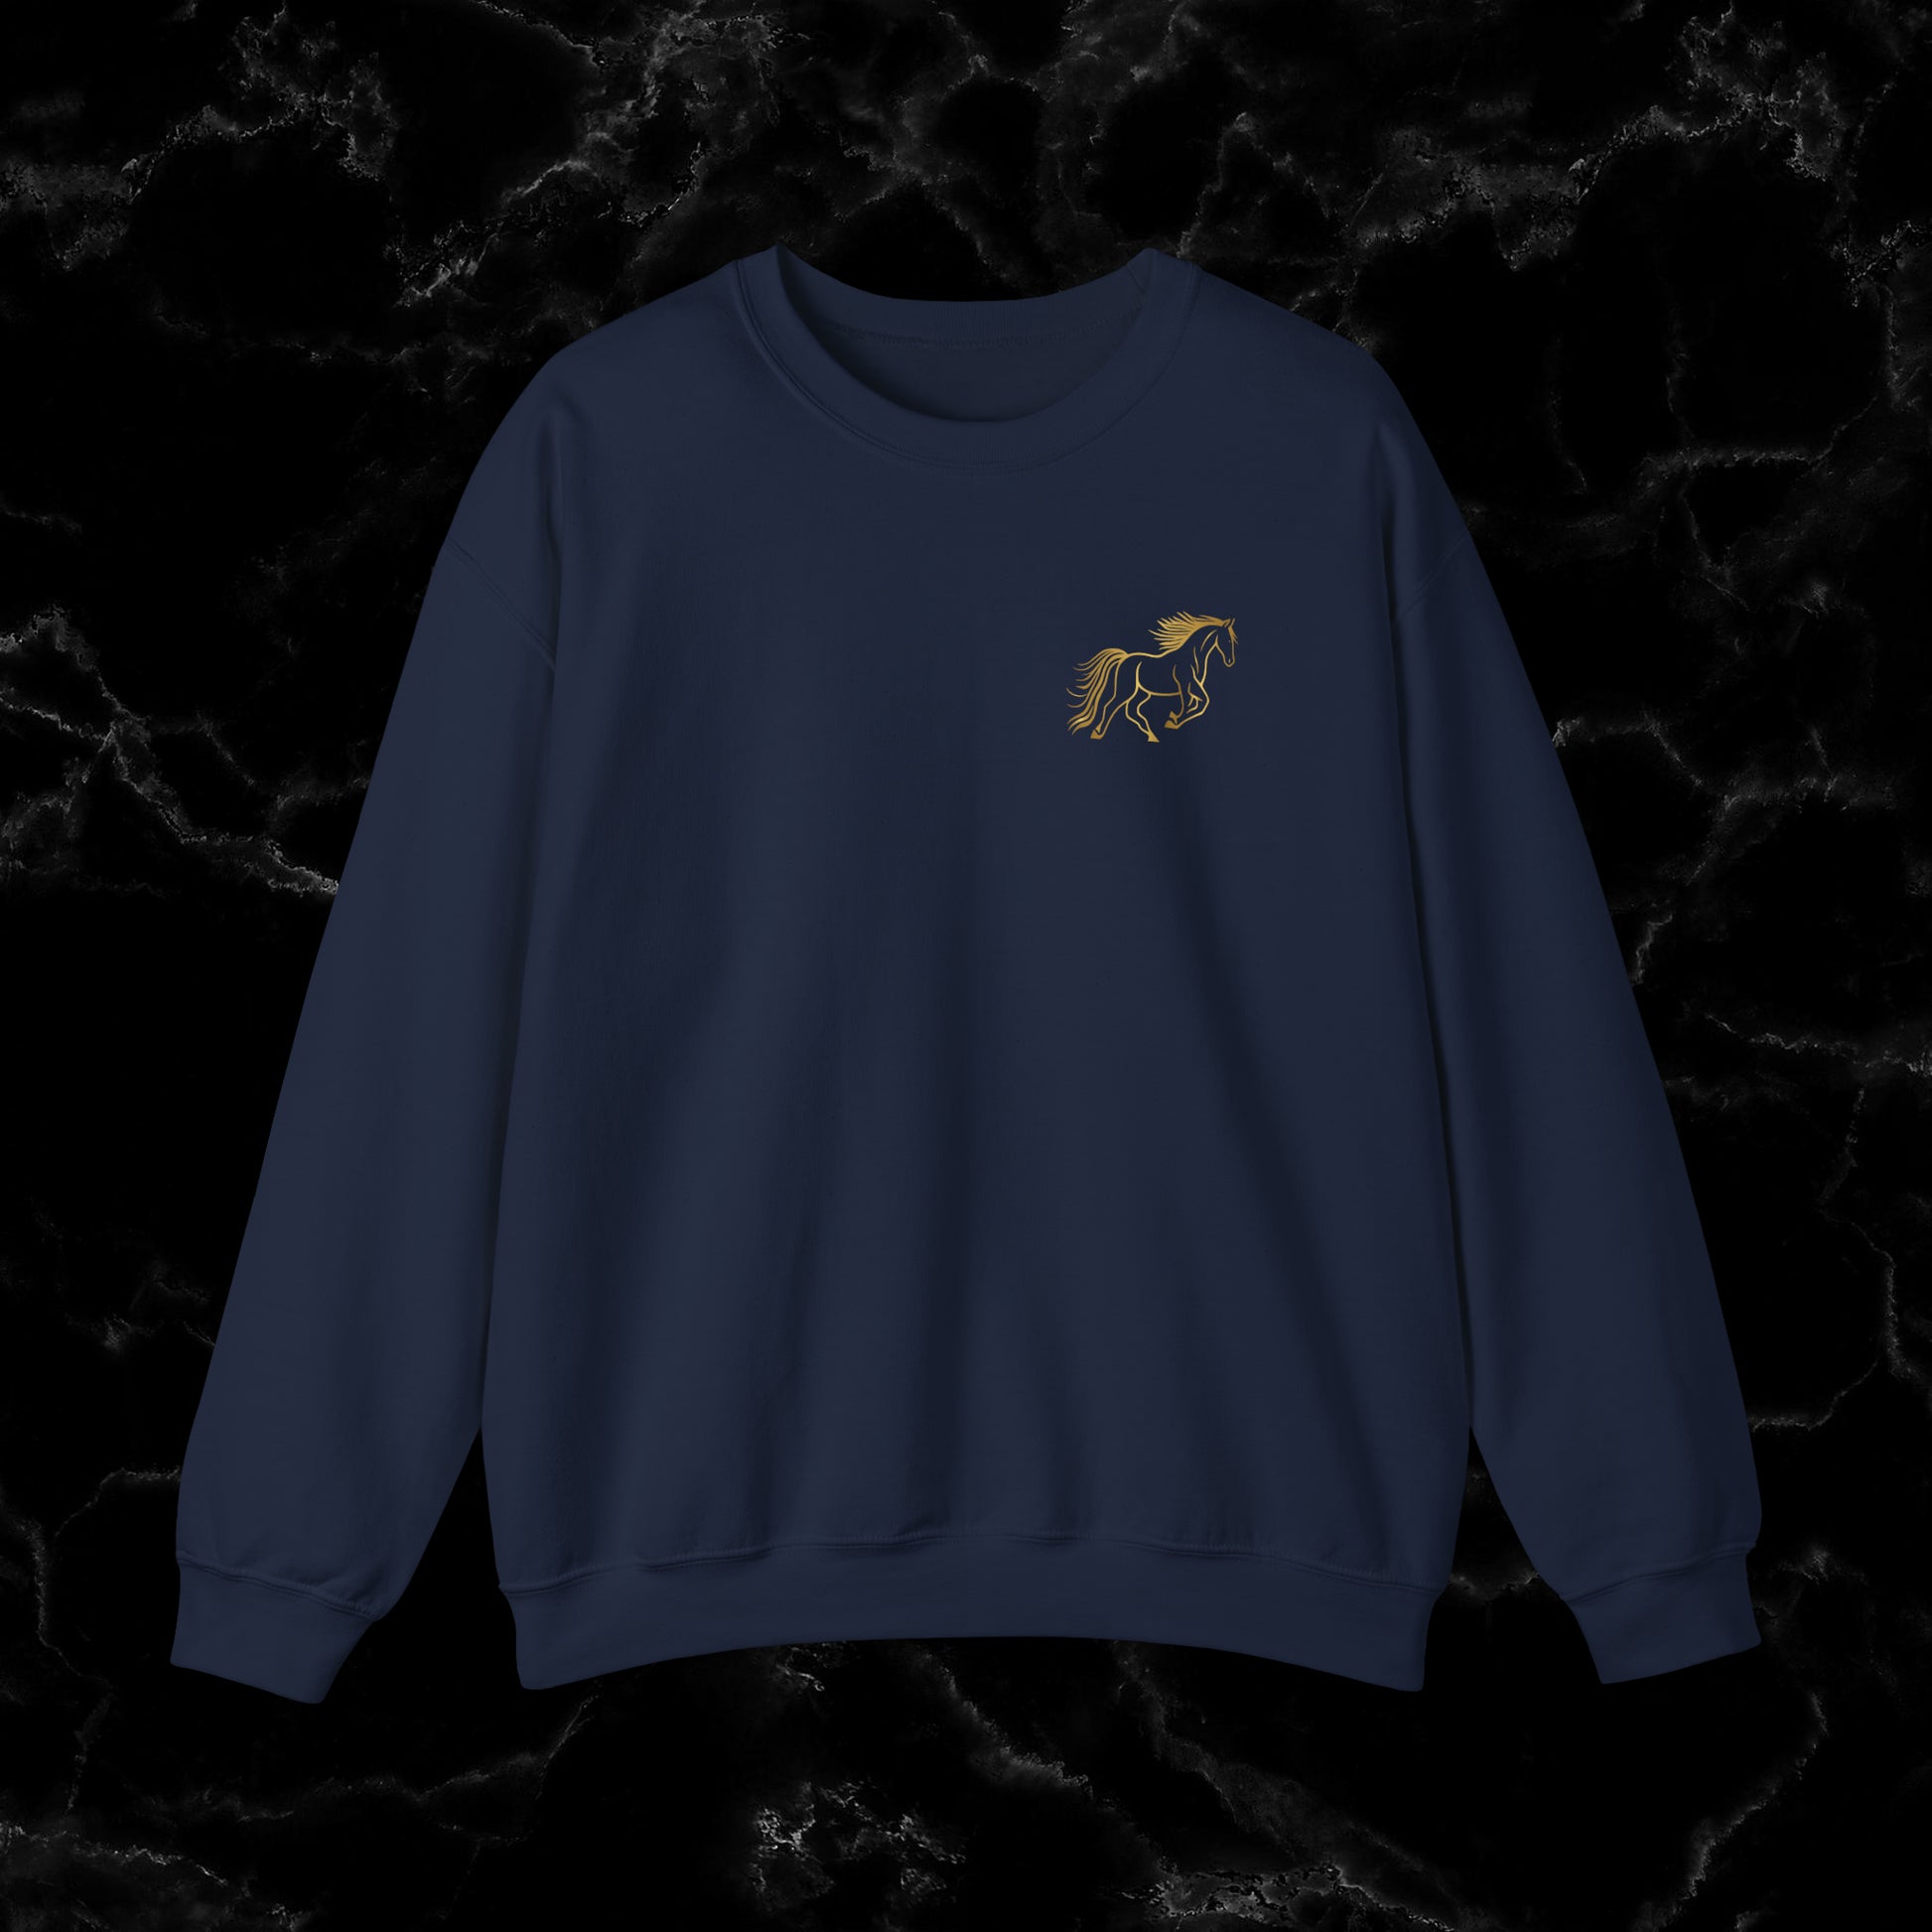 Personalized Horse Sweatshirt - Gift for Horse Owner, Perfect for Christmas, Birthdays, and Equestrian Enthusiasts Sweatshirt S Navy 